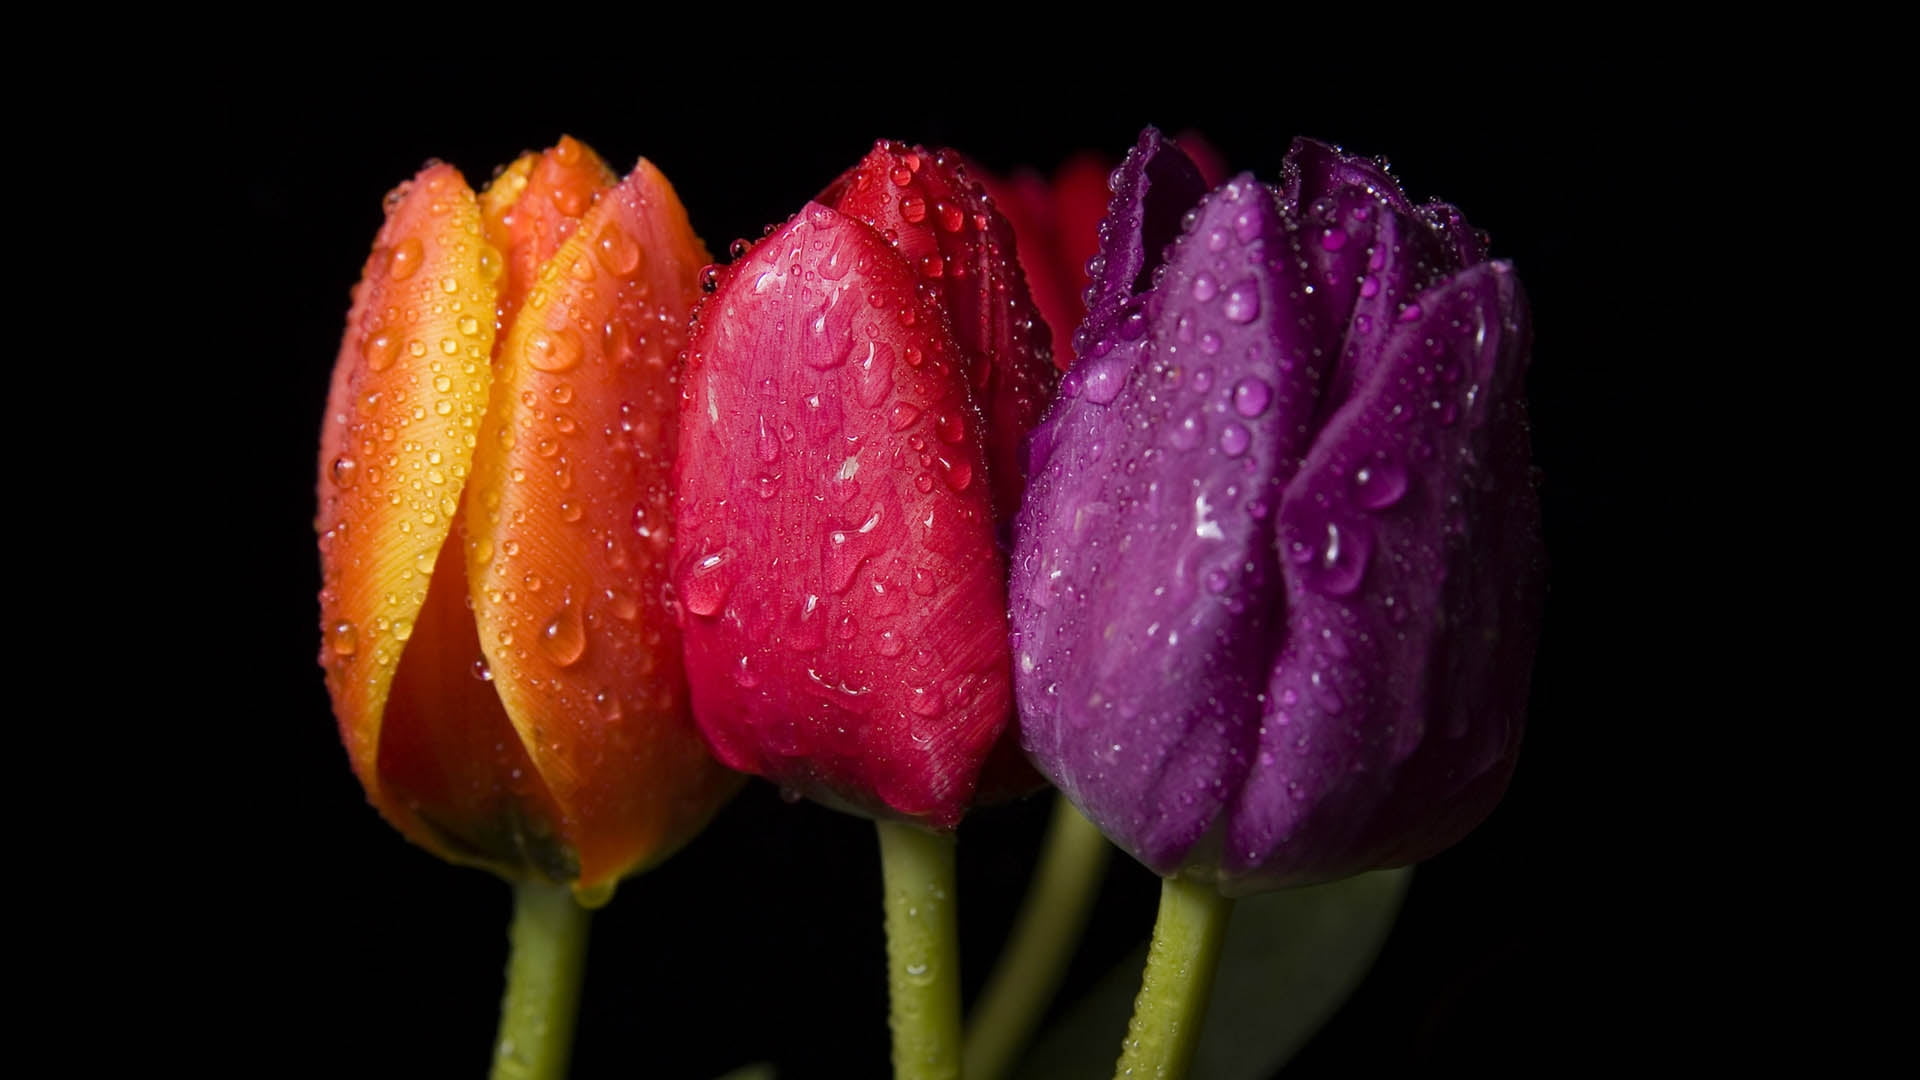 Close-up photography of three orange, red, and purple Tulips with ...